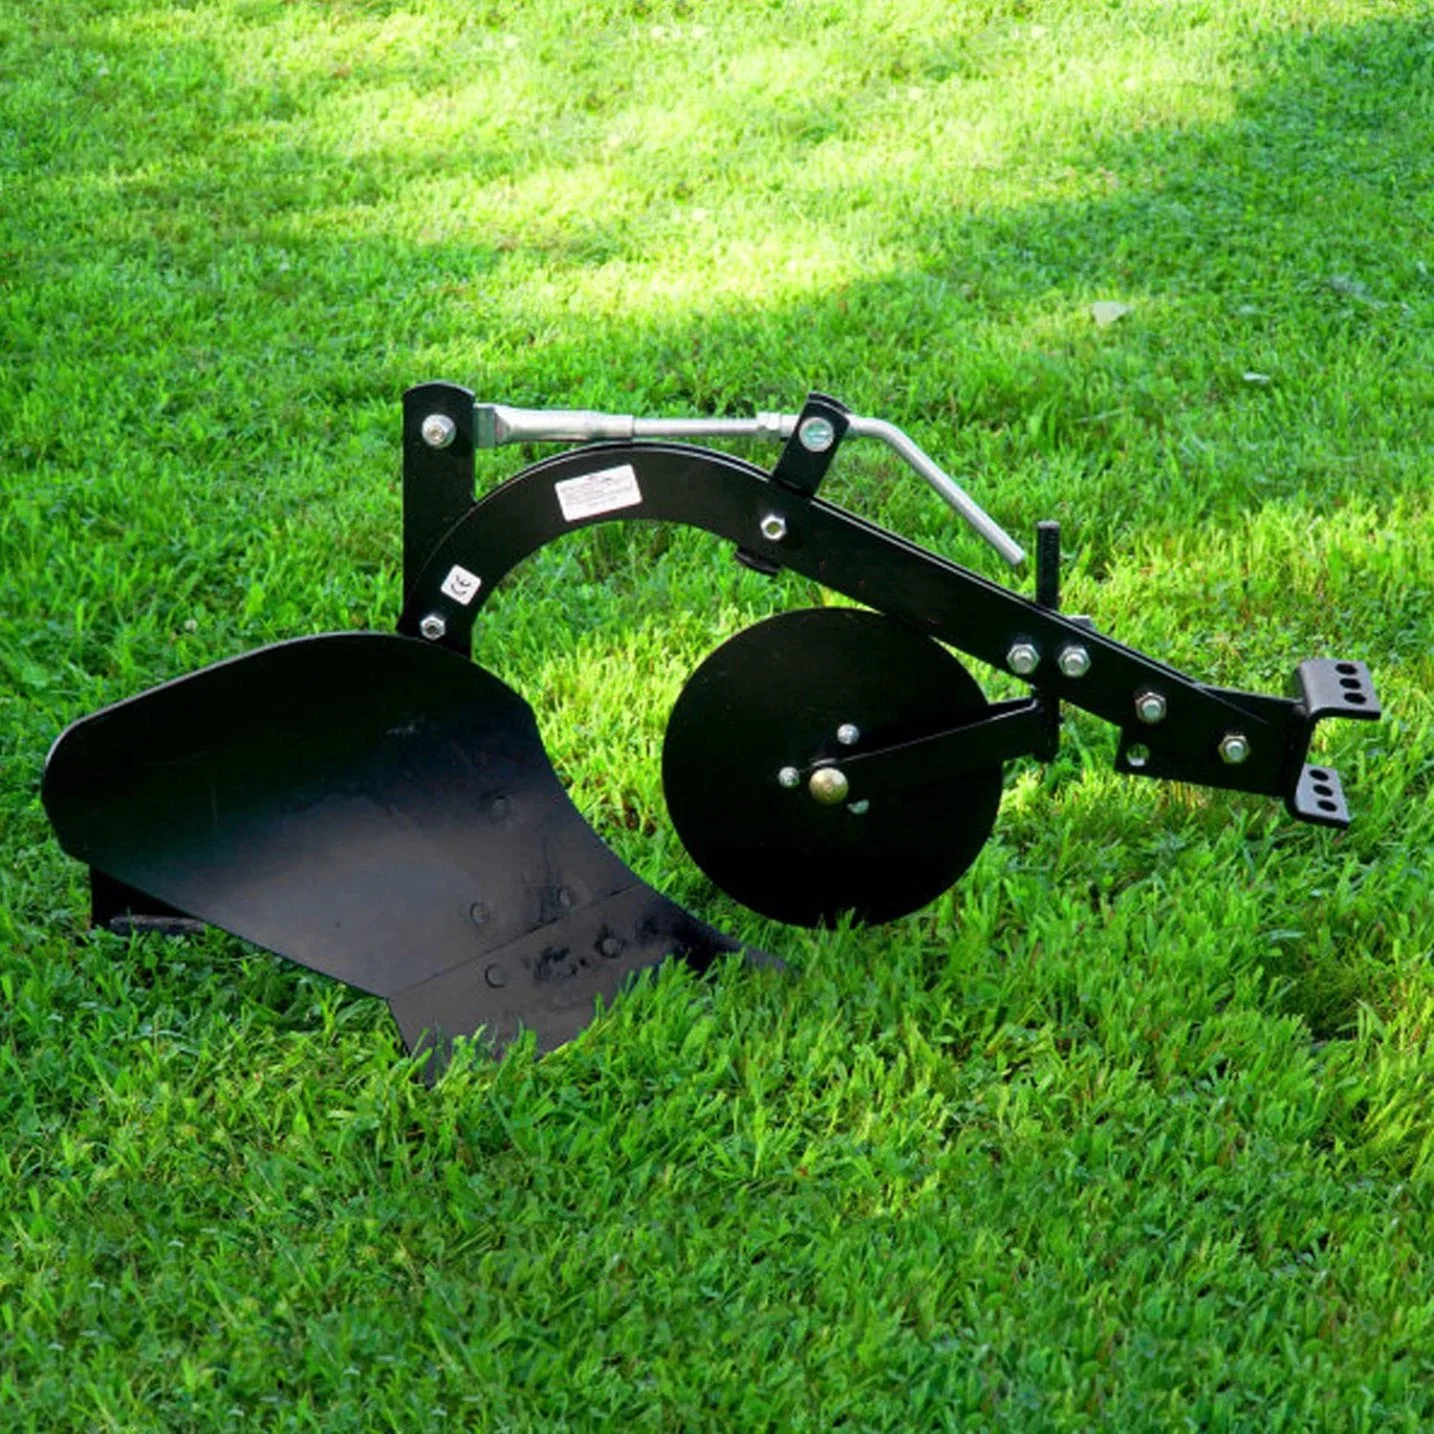 PP-510-a Sleeve Hitch Tow Behind Moldboard Plow, 10"